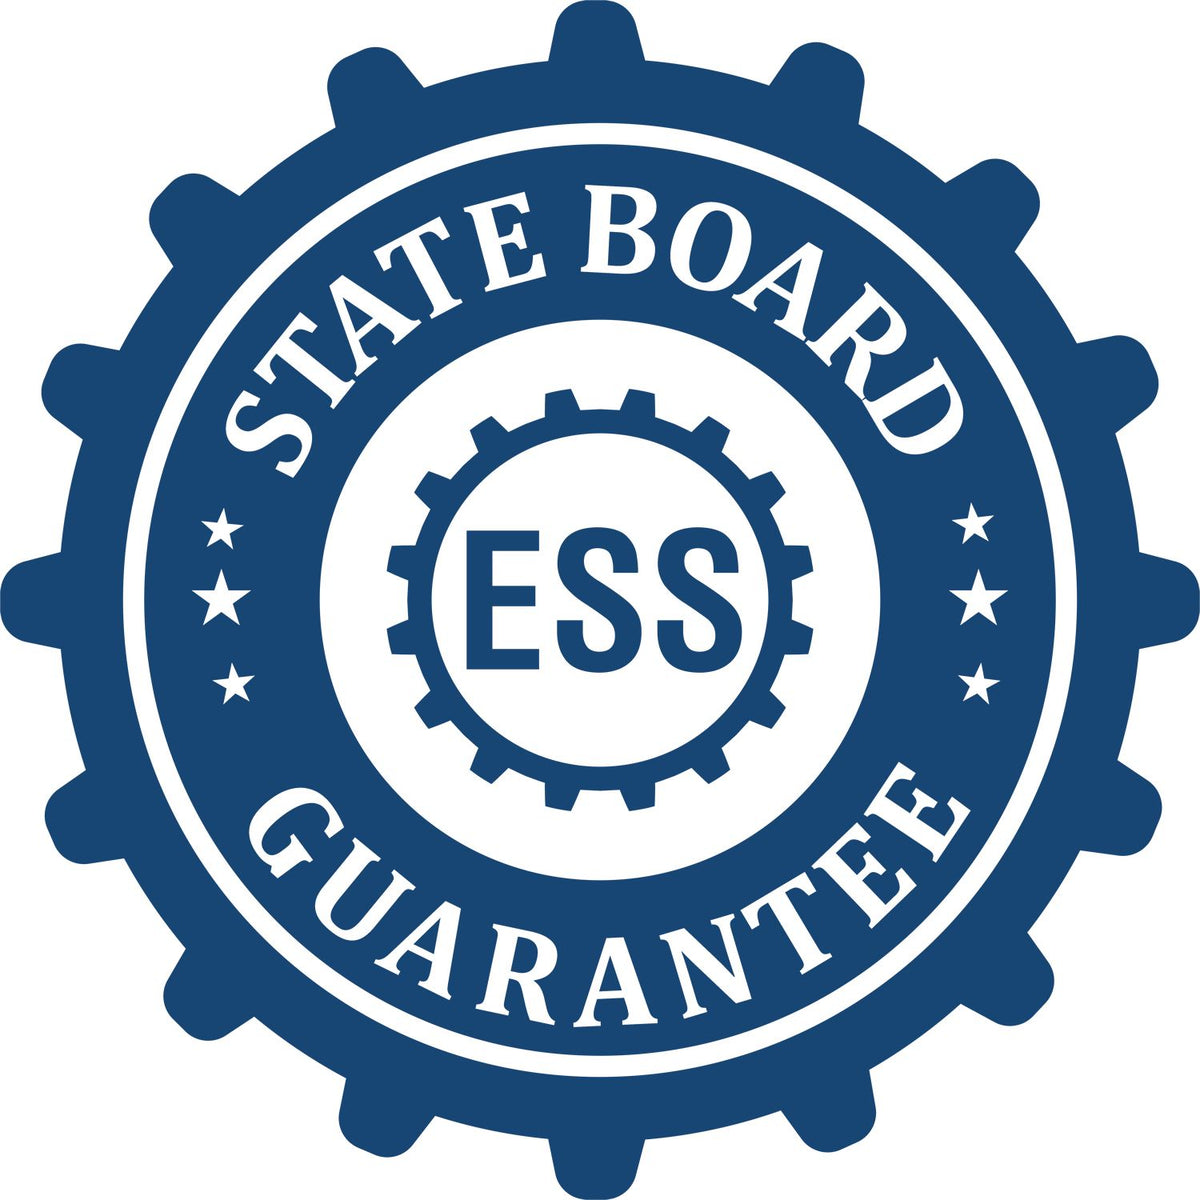 An emblem in a gear shape illustrating a state board guarantee for the Colorado Geologist Desk Seal